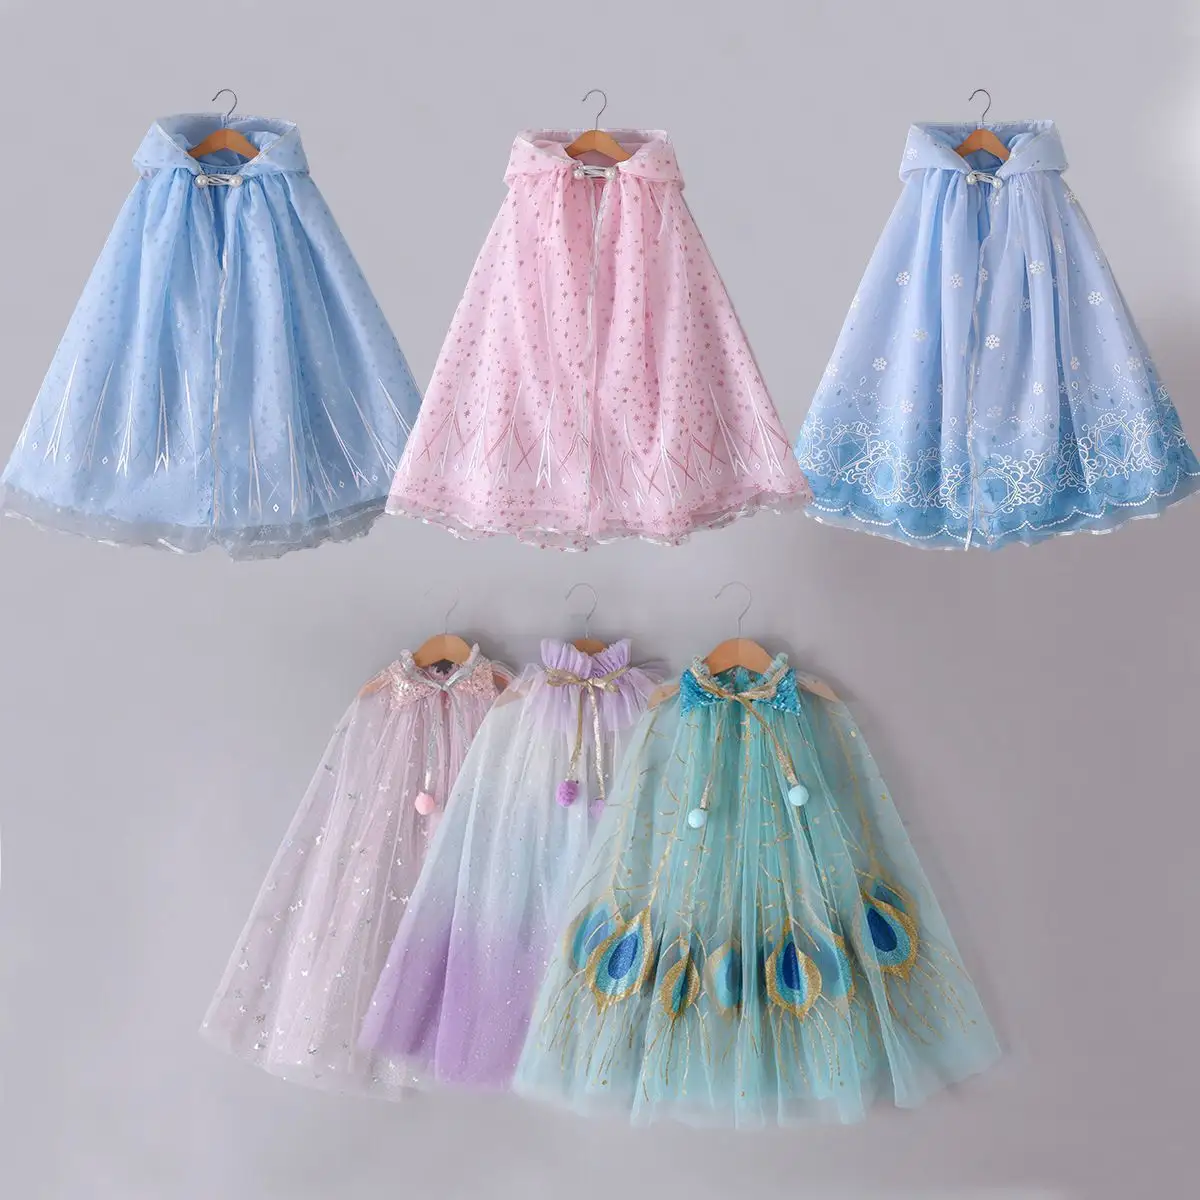 Princess Cape For Girls Colorful Cloak Halloween Cosplay Girls Cloak Girls Cape Fashion Cloak For Party